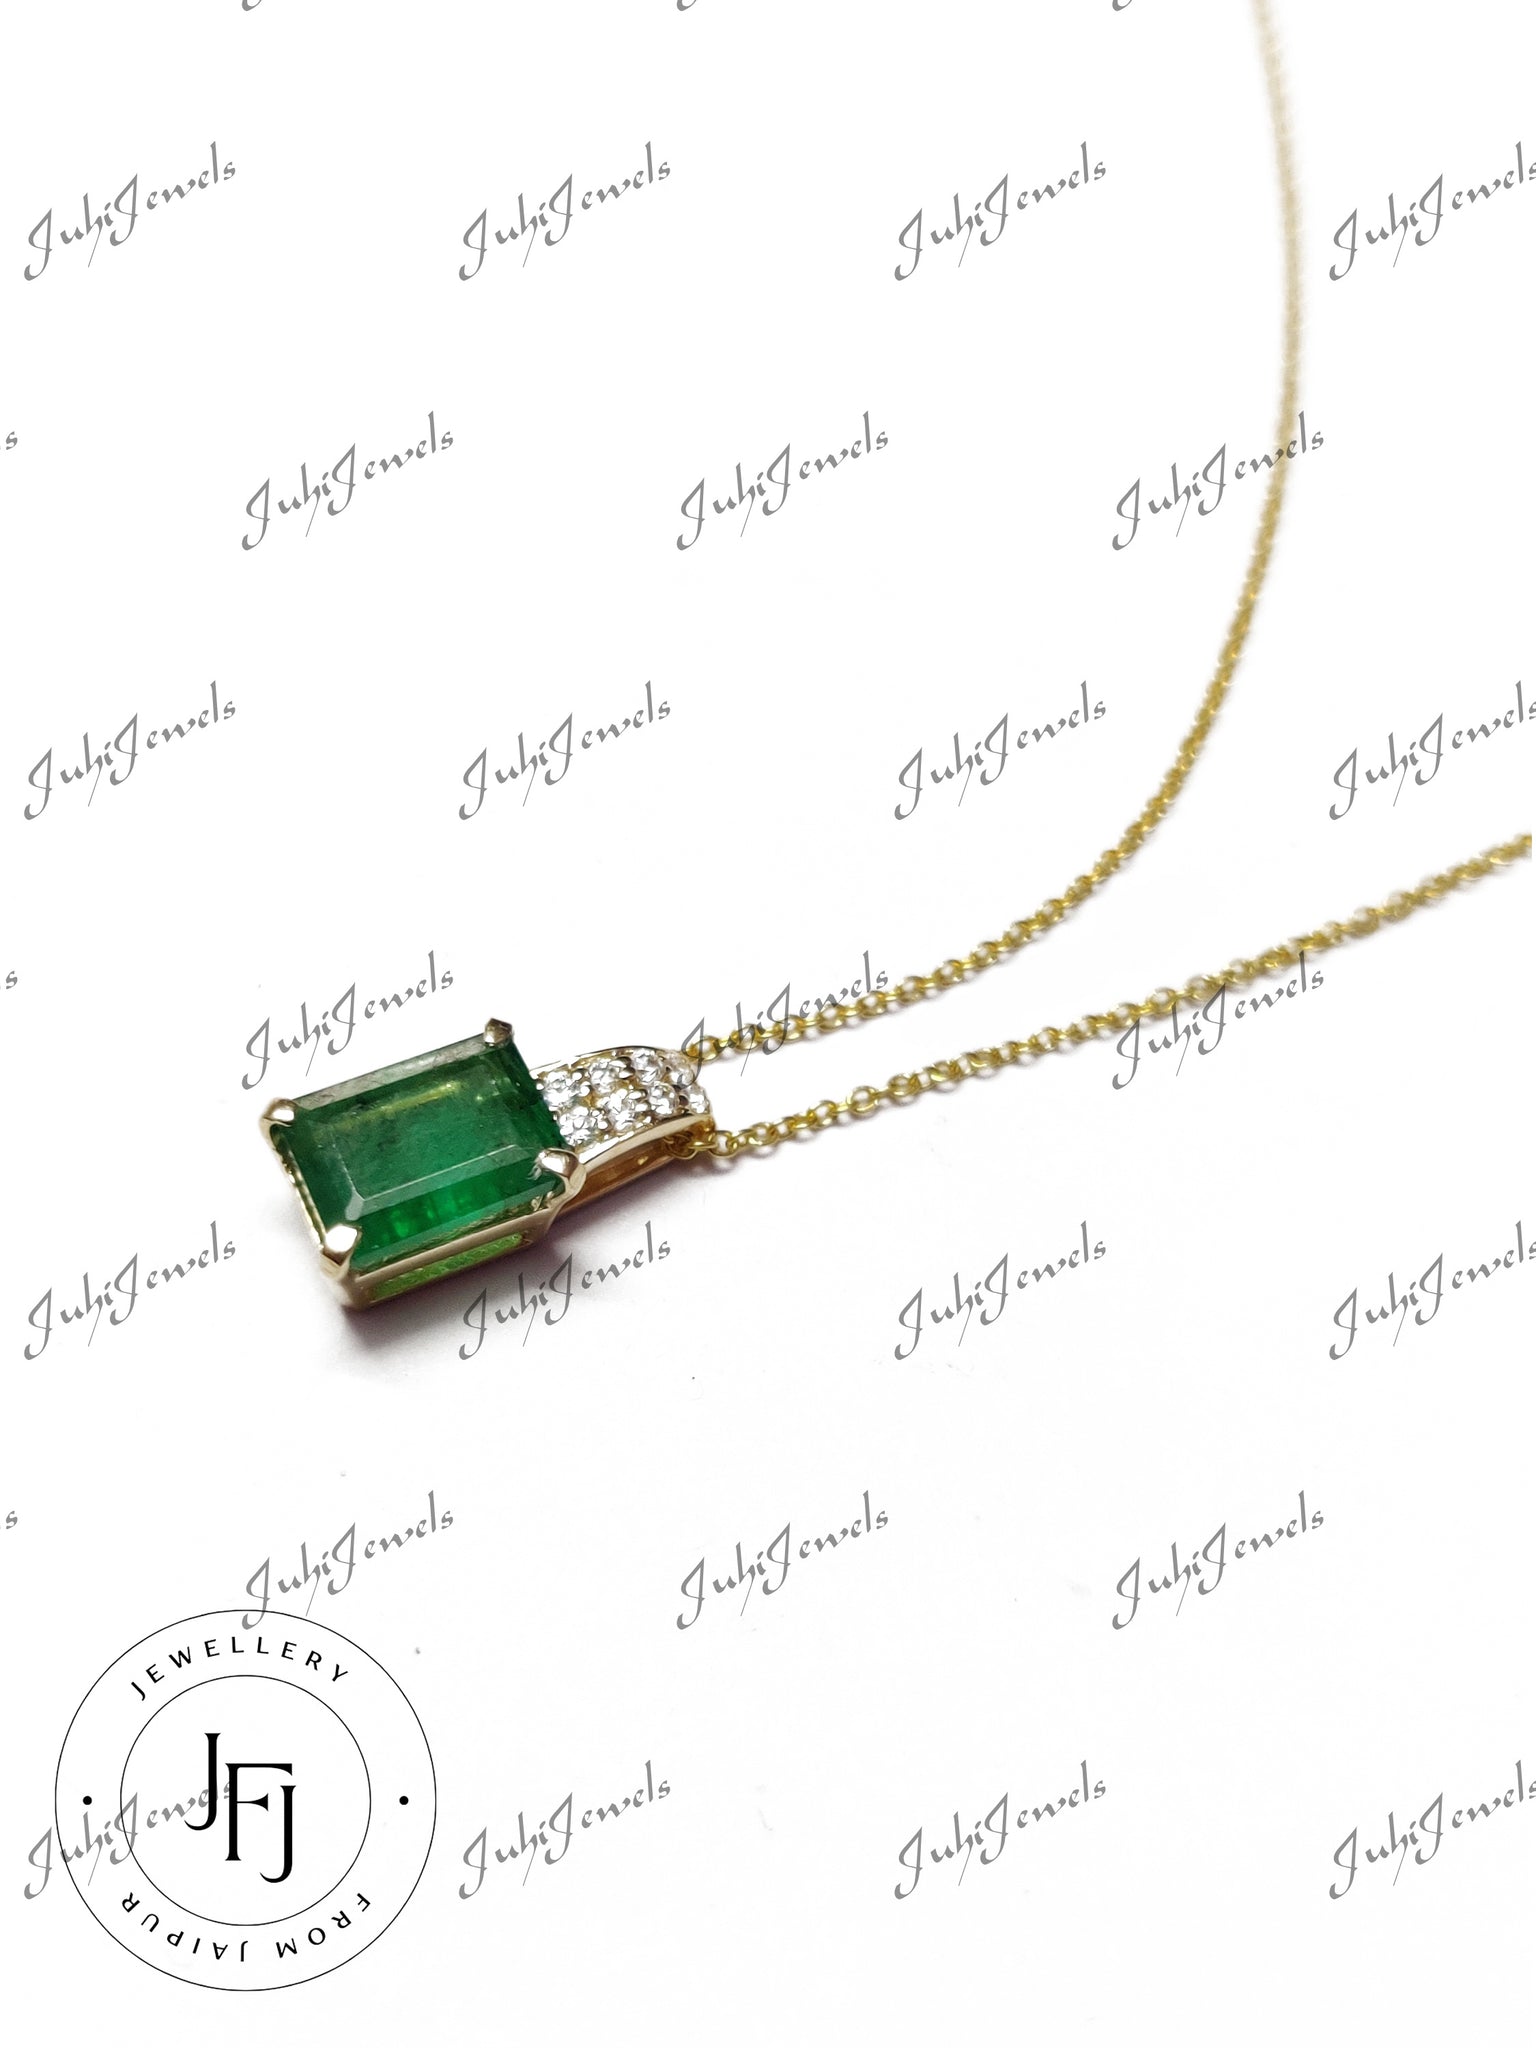 Gold Emerald Necklace 14K Gold Emerald Pendant Necklace 14K Gold Cable Chain 1.5 Ct Emerald Gold Pendant 1 mm Chain May Birthstone Necklace